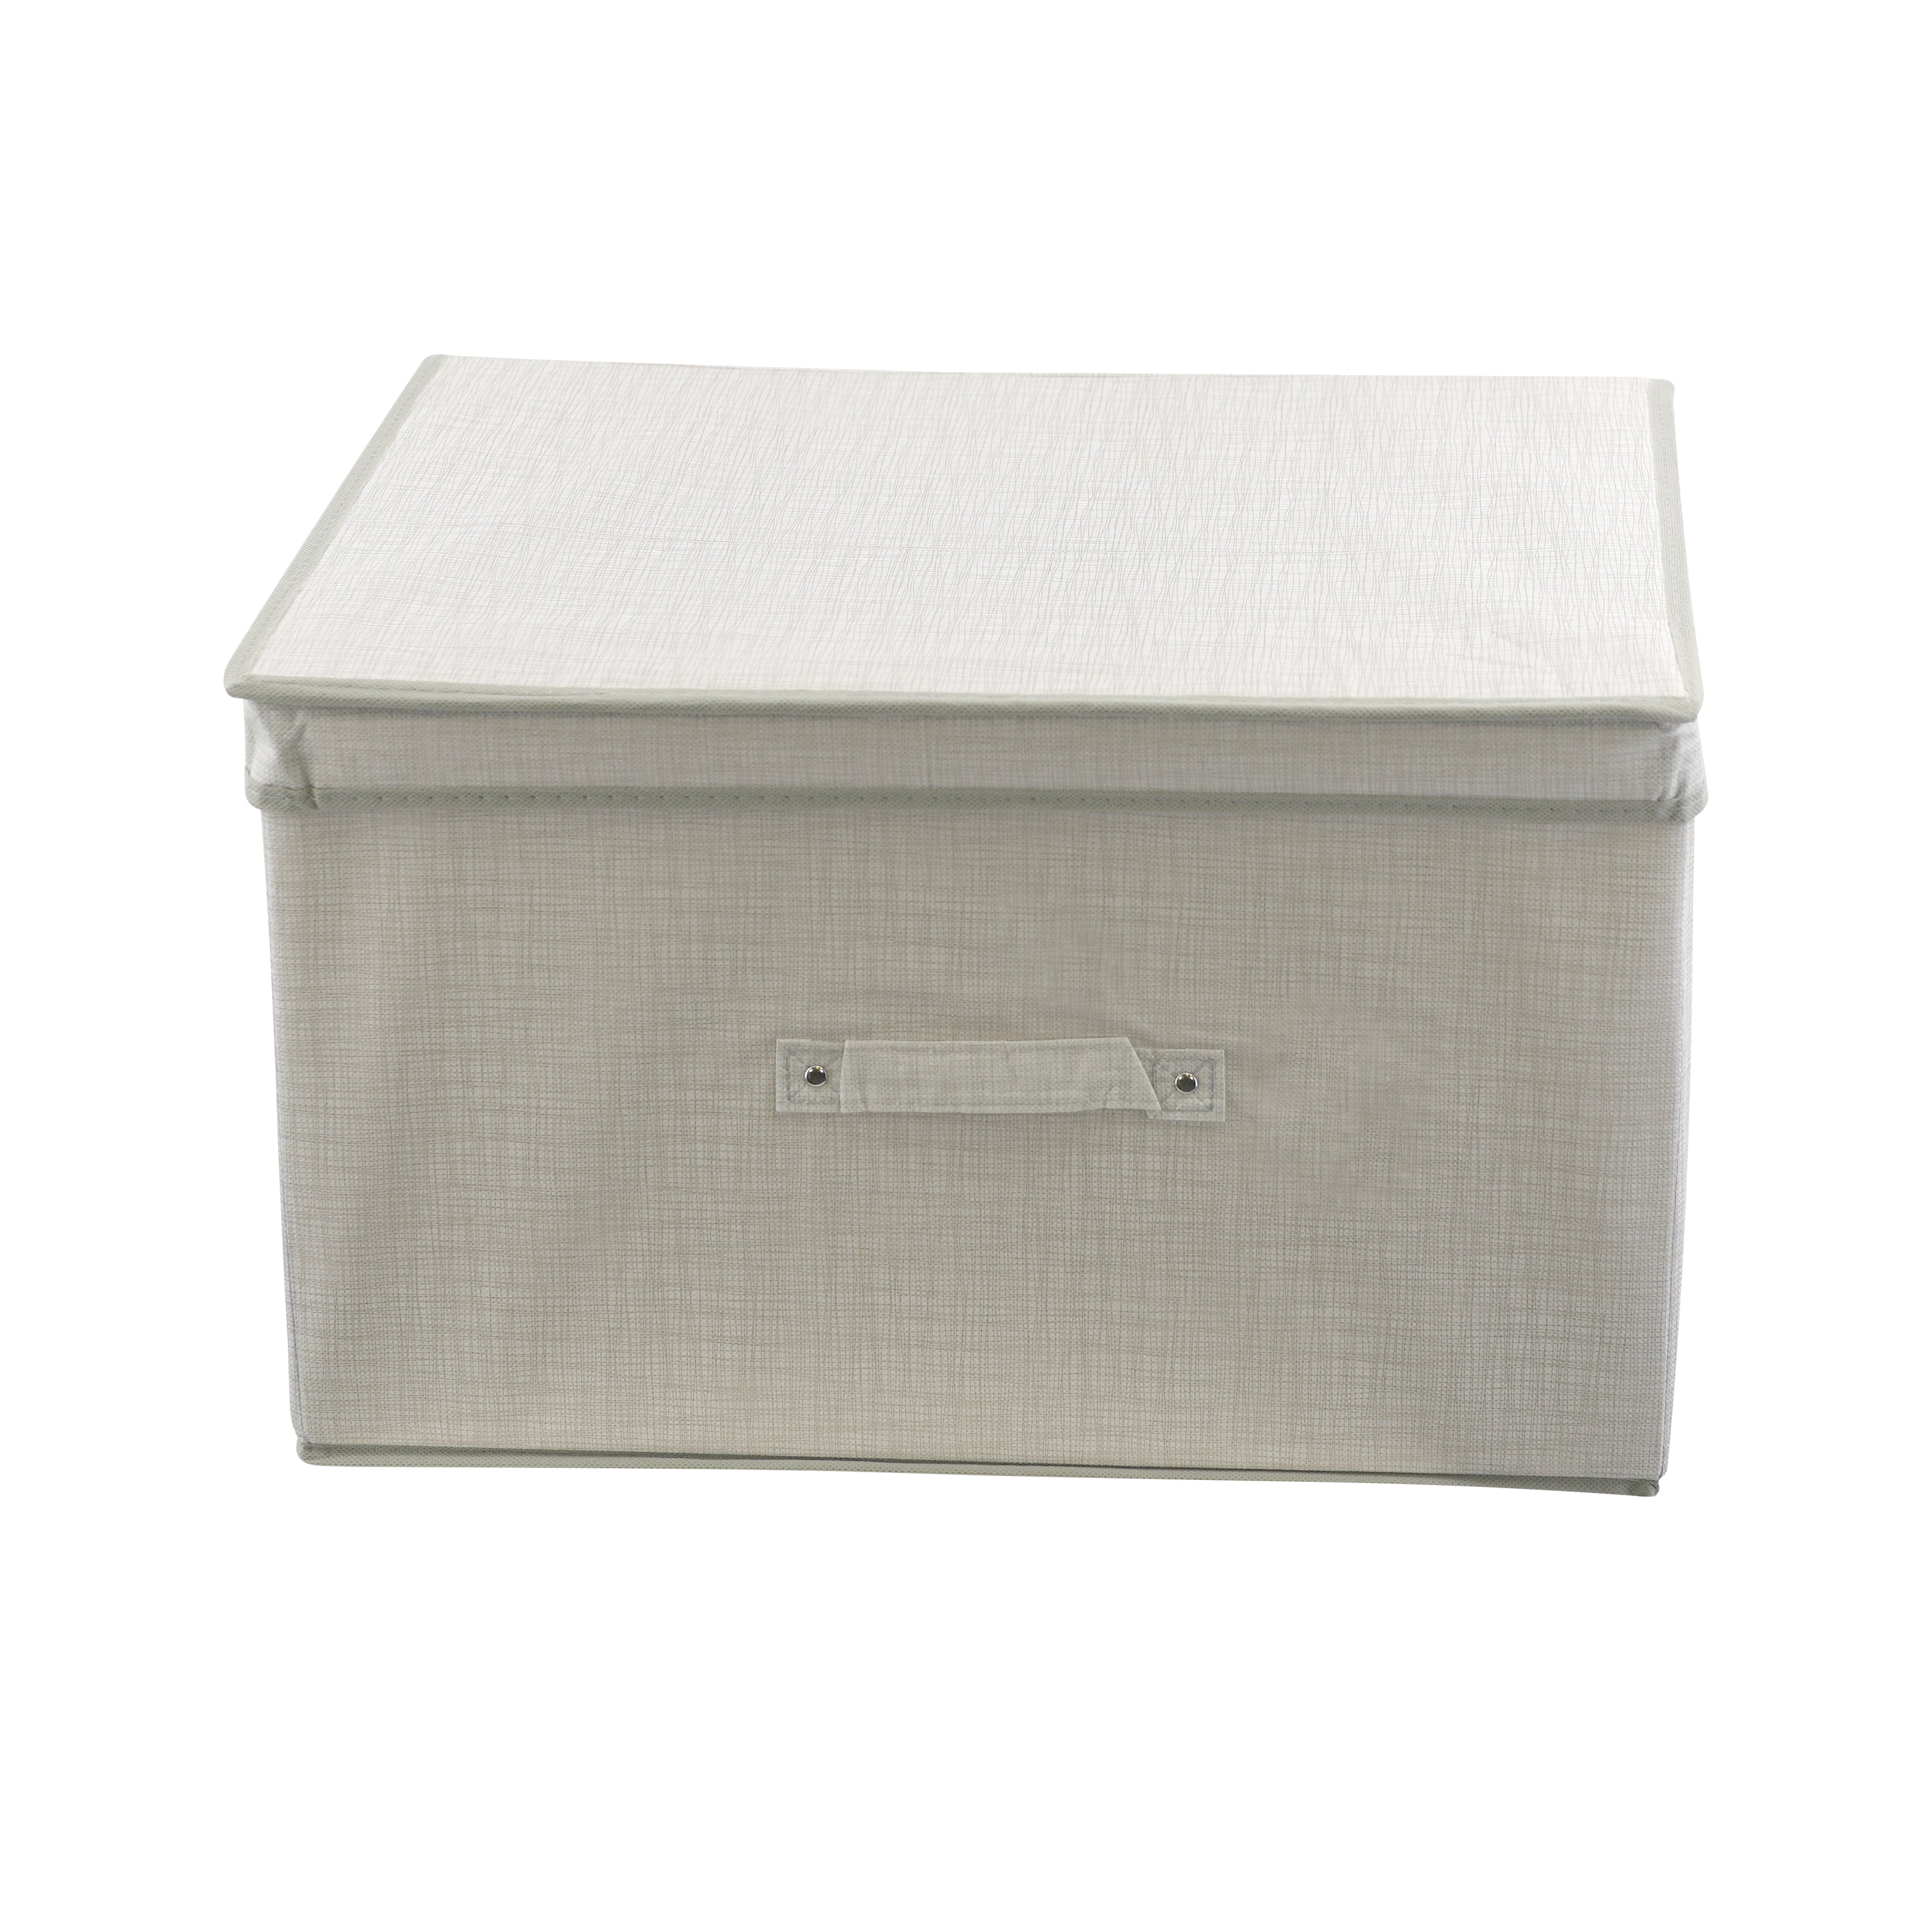 Linen Natural Large Storage Box GEEZY - The Magic Toy Shop